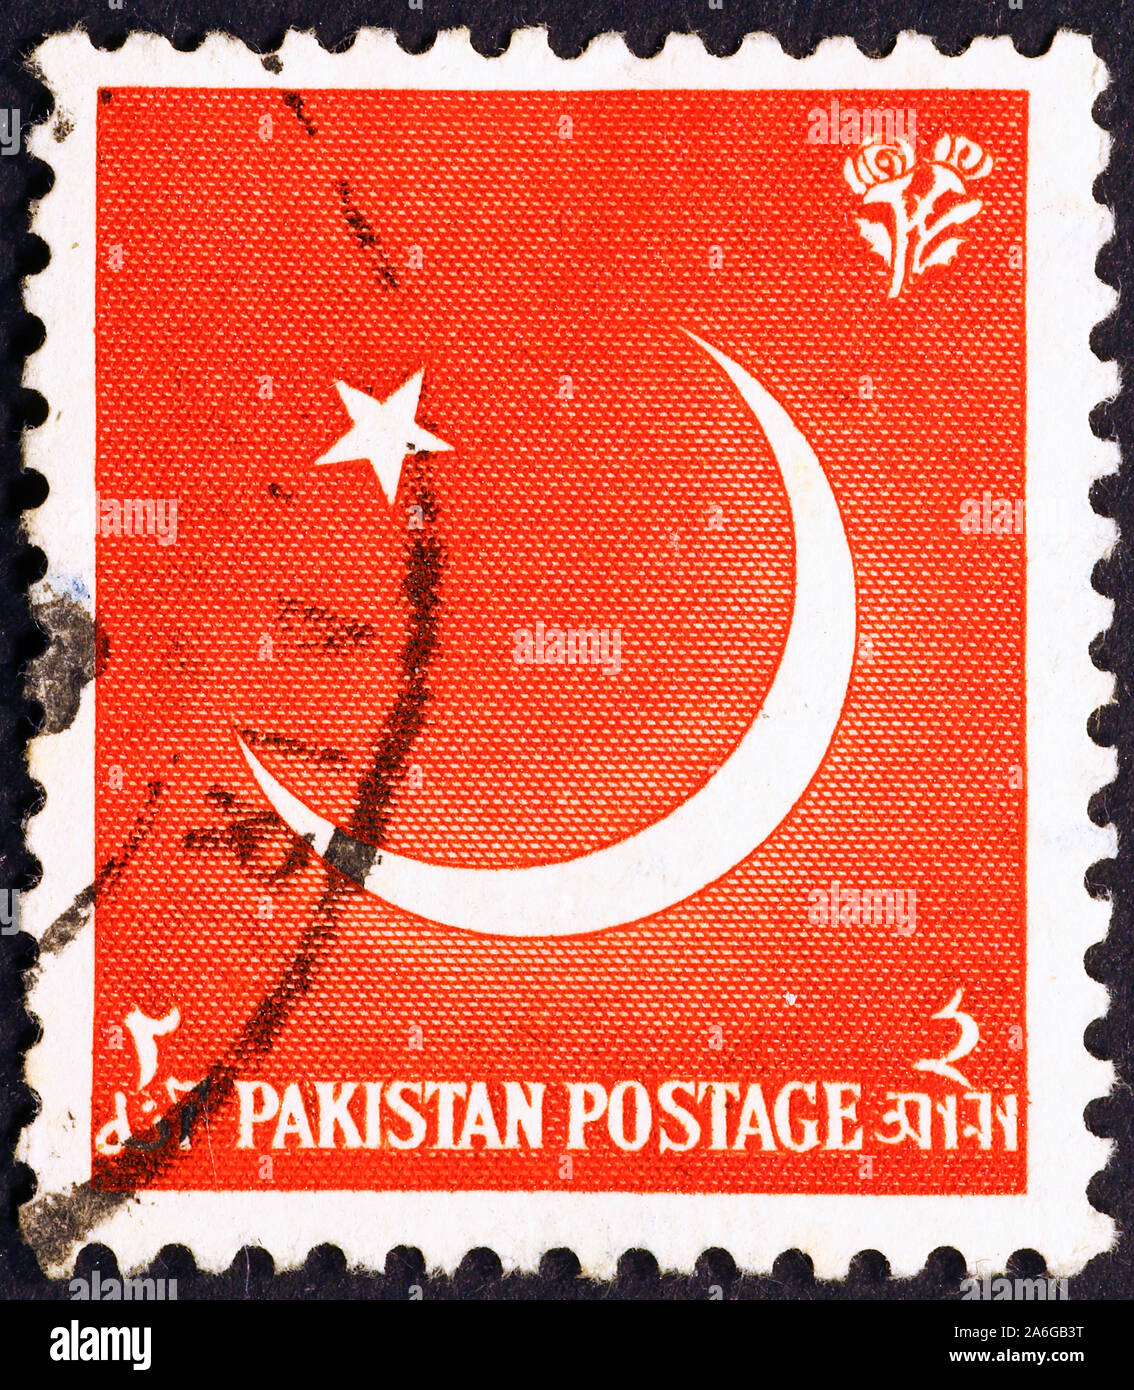 Star and crescent on postage stamp of Pakistan Stock Photo